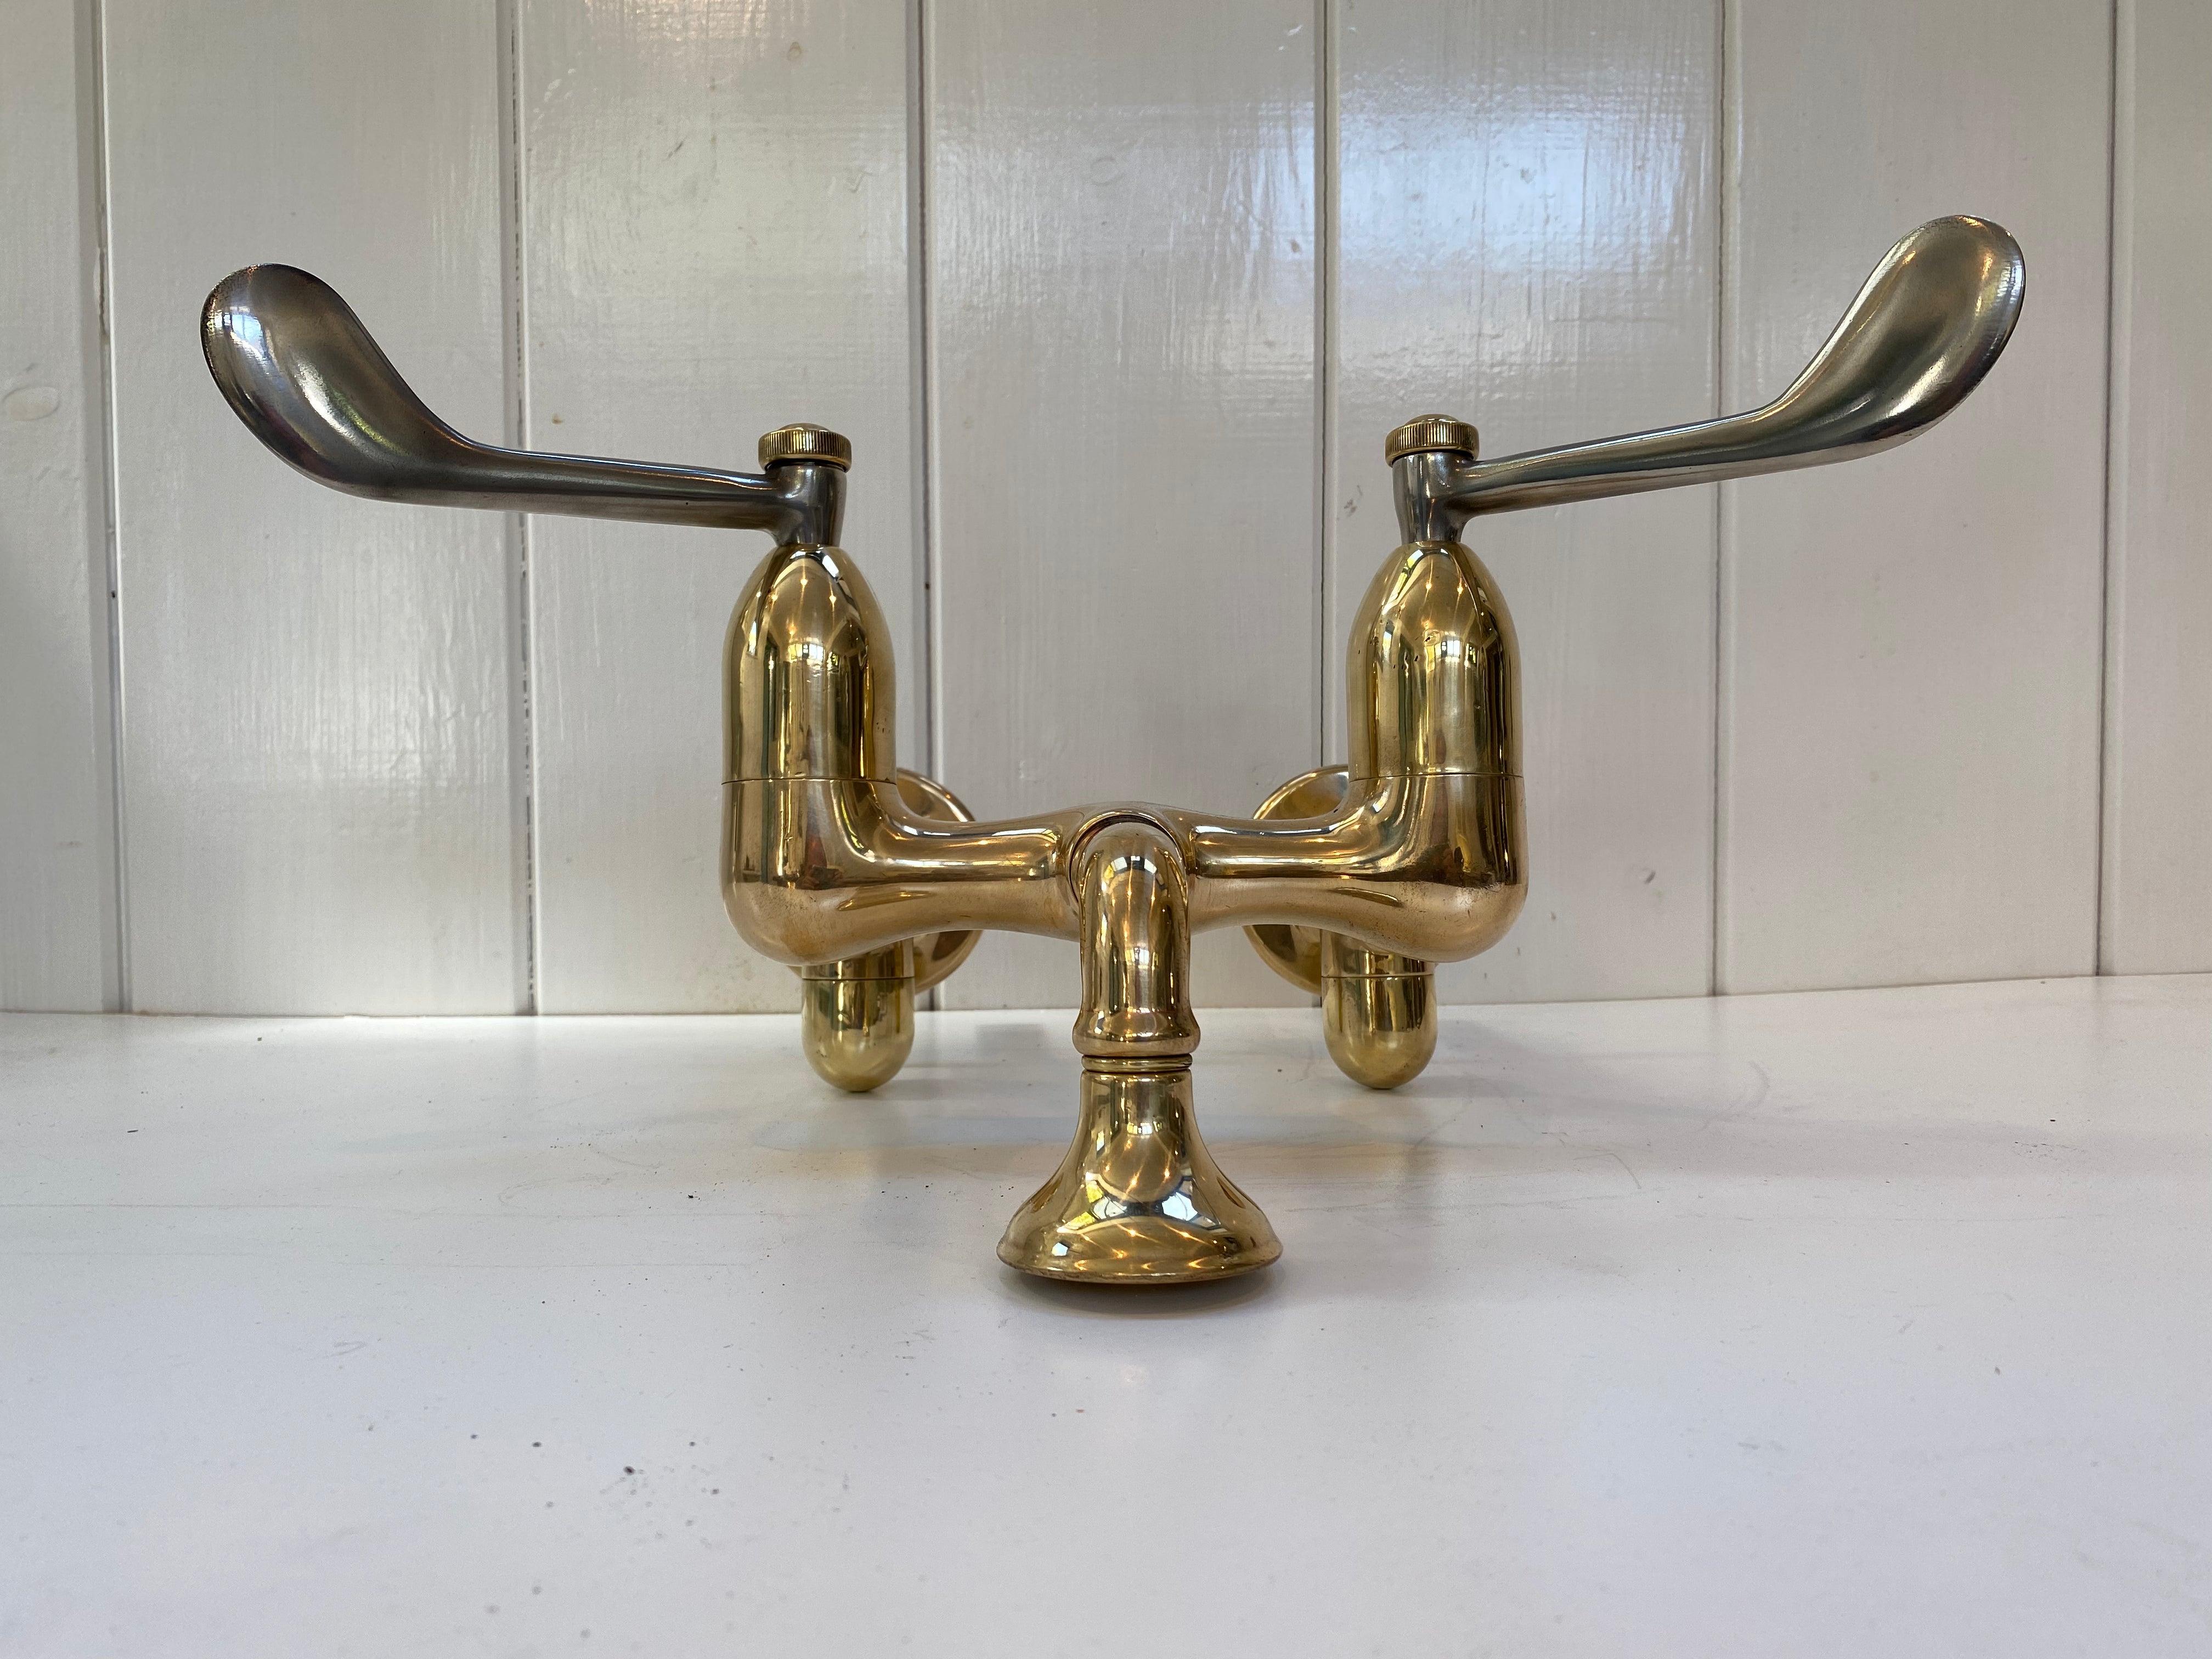 American Surgeon-Lever Mixer Tap C1920 in Unsealed Polished Brass Finish